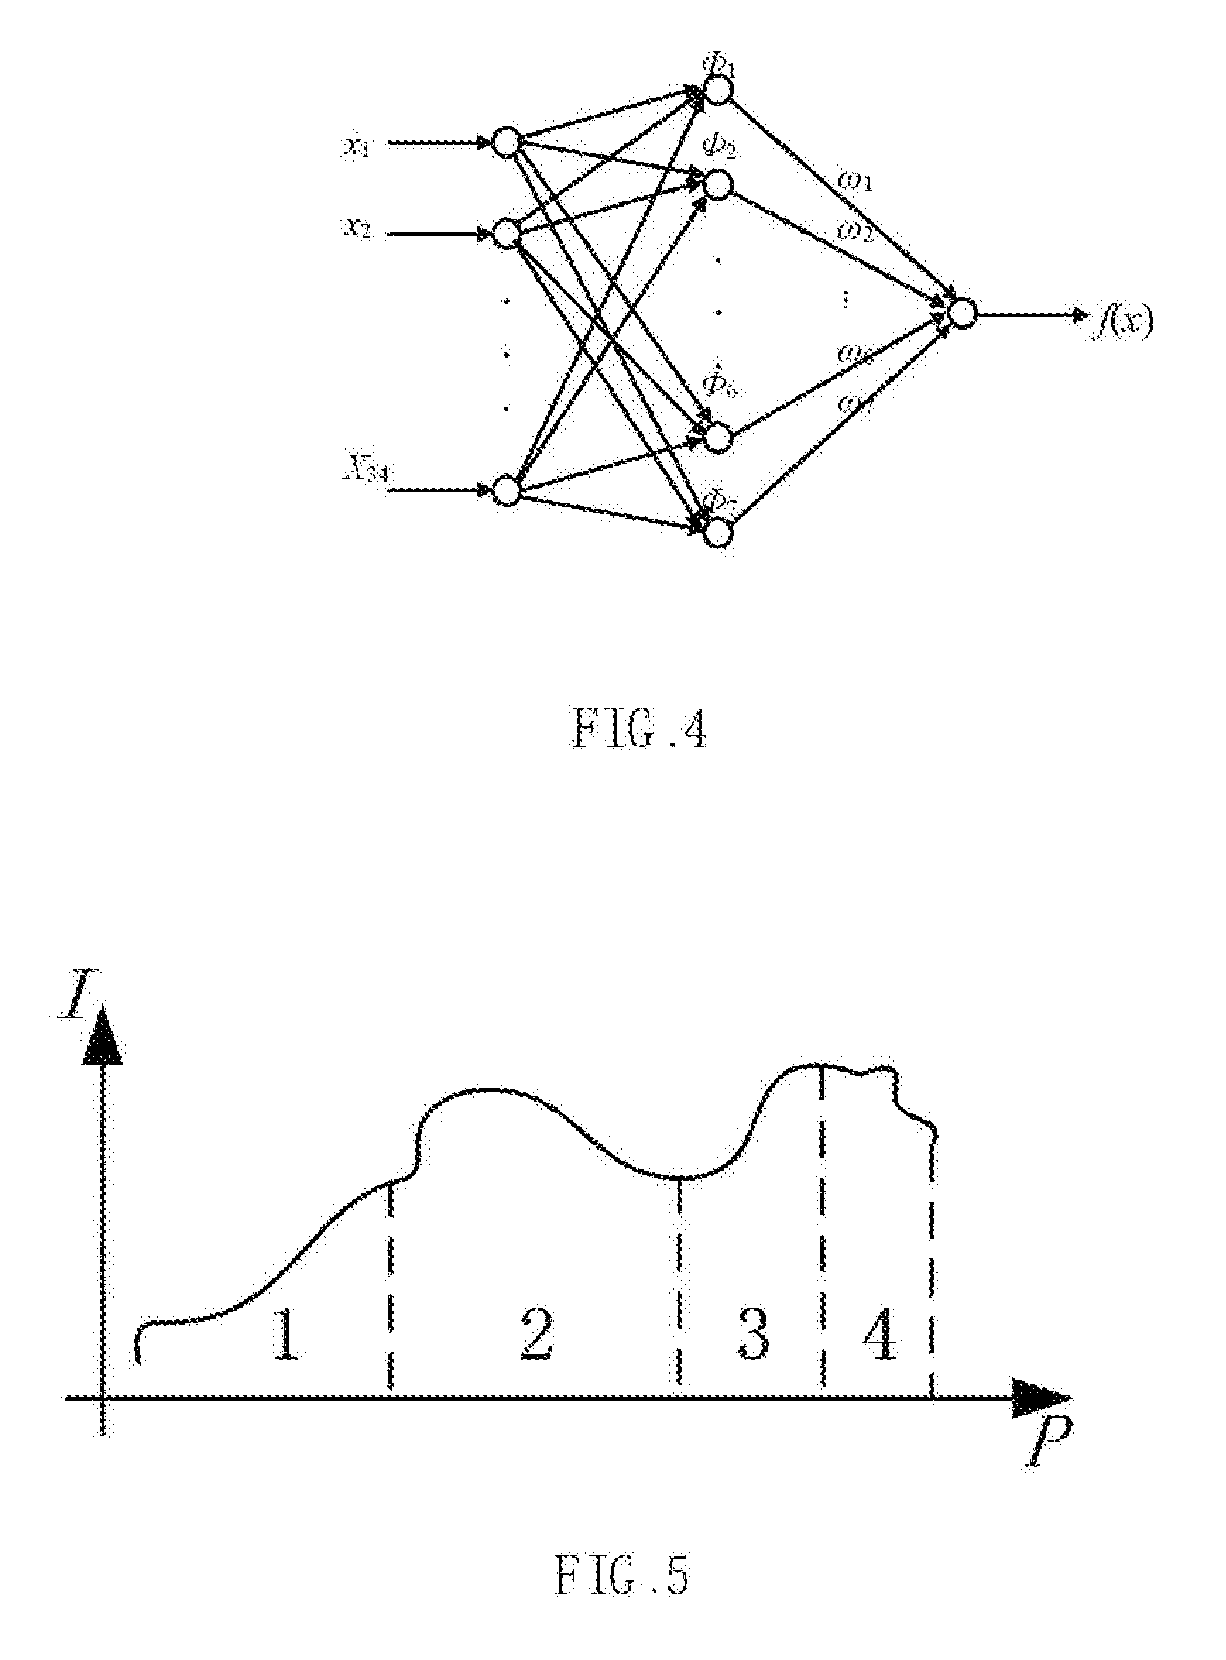 Method for realizing centralized control platform for large fully-mechanized coal mining face equipment